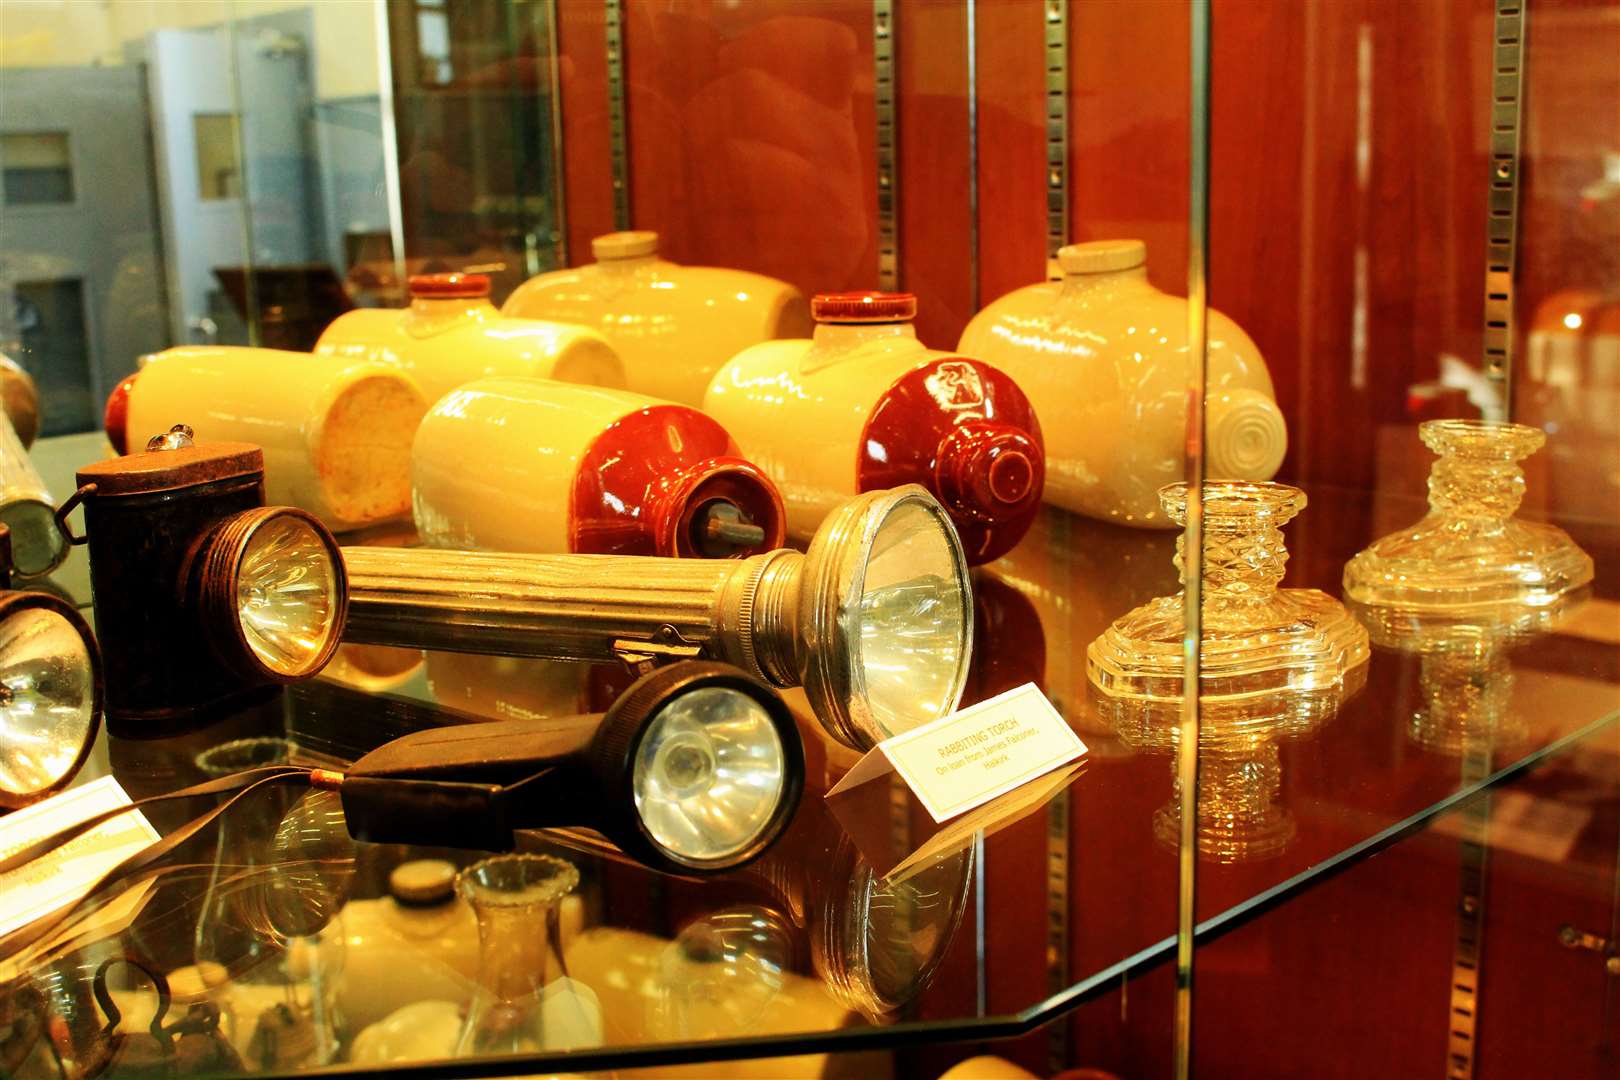 A rabbiting torch is among the items in this display case.